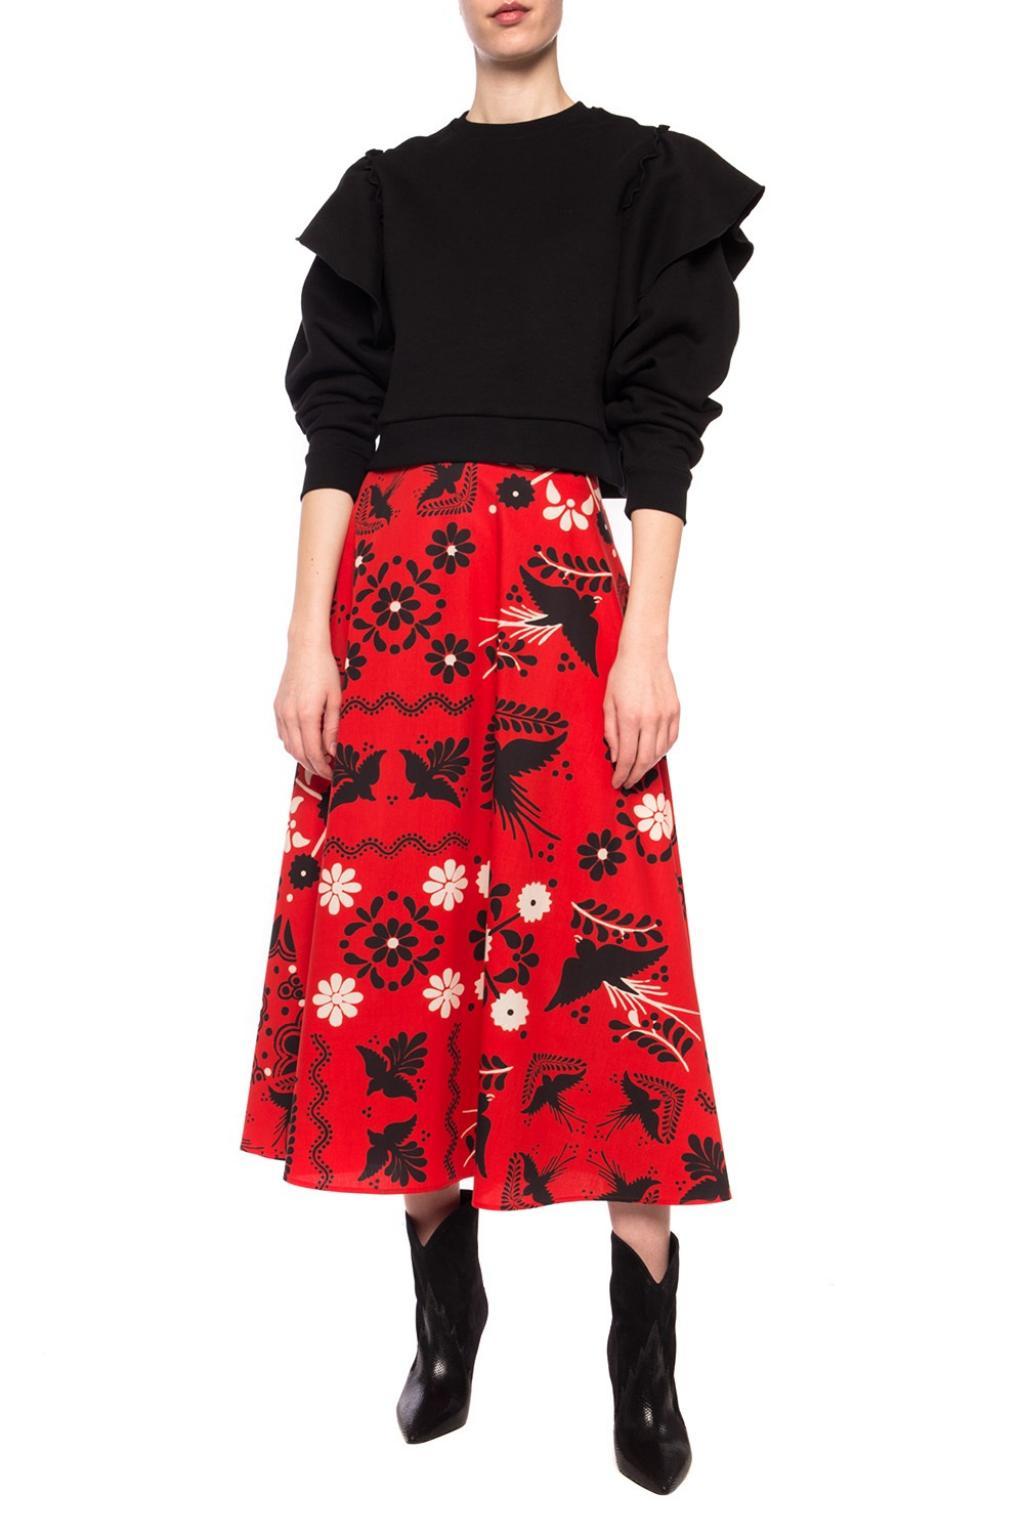 Lyst - RED Valentino Patterned Skirt in Red